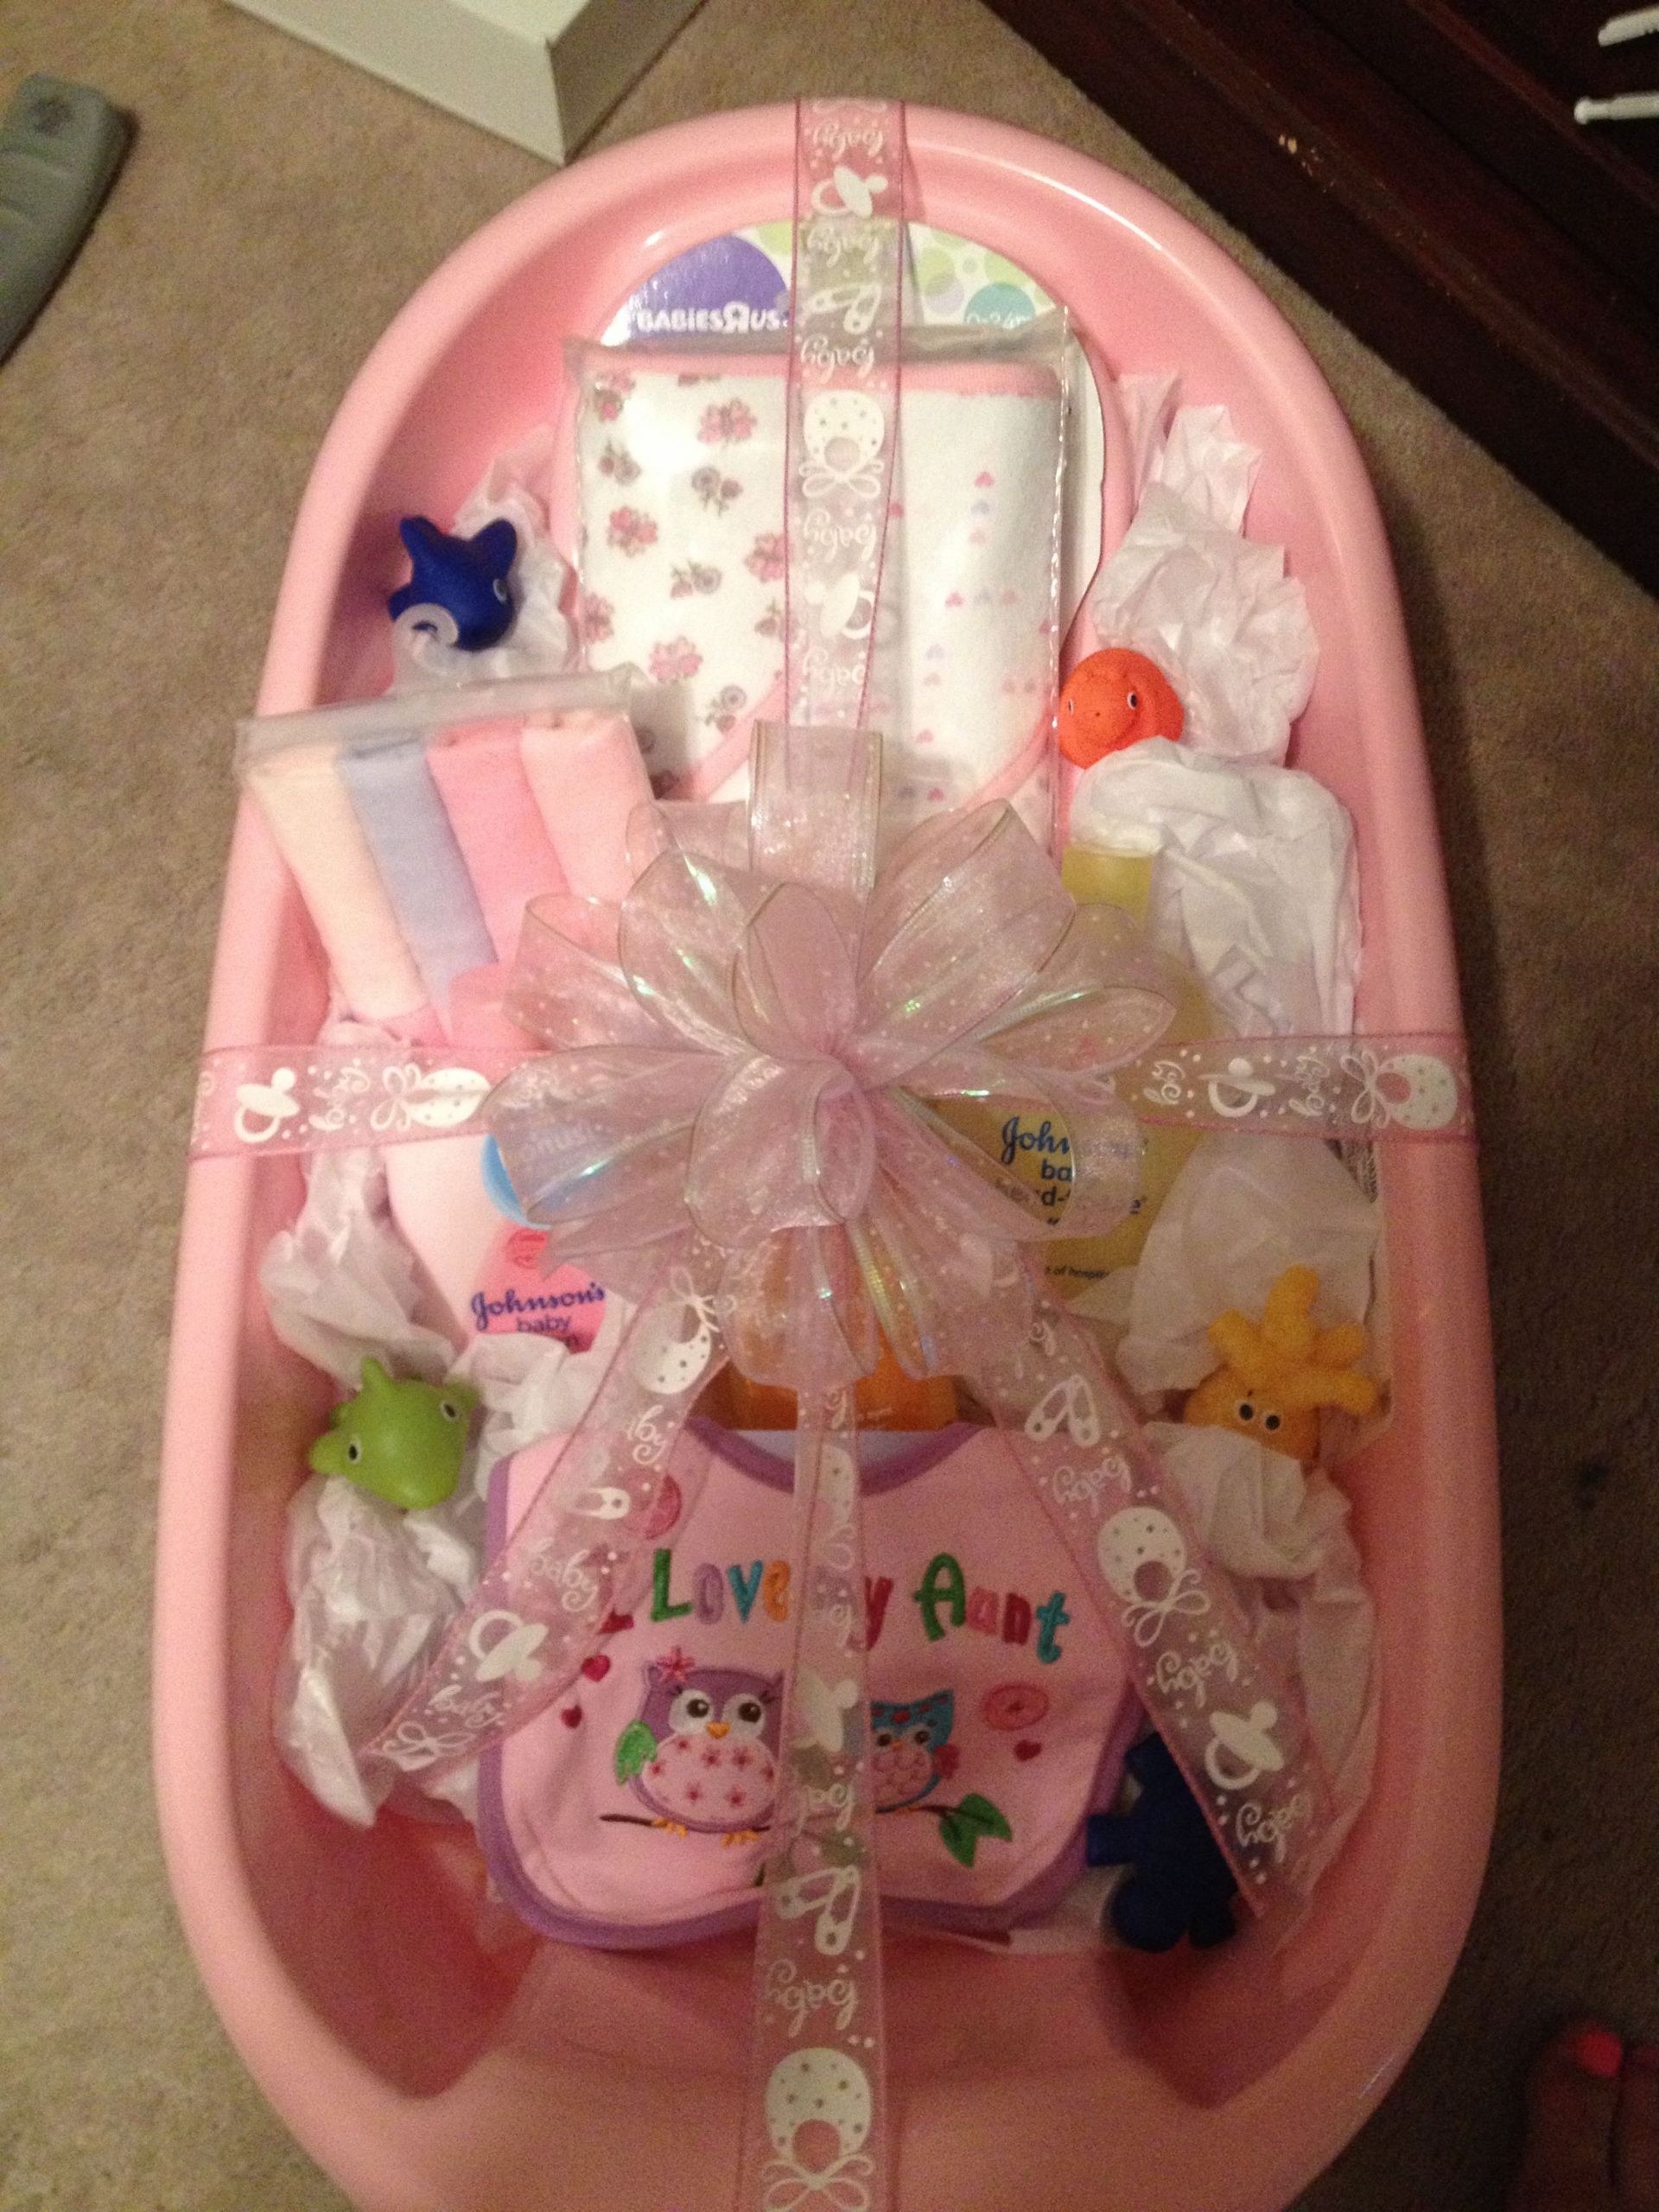 Baby Bath Gift Ideas
 Baby bath tub t idea Made this for my sister for her